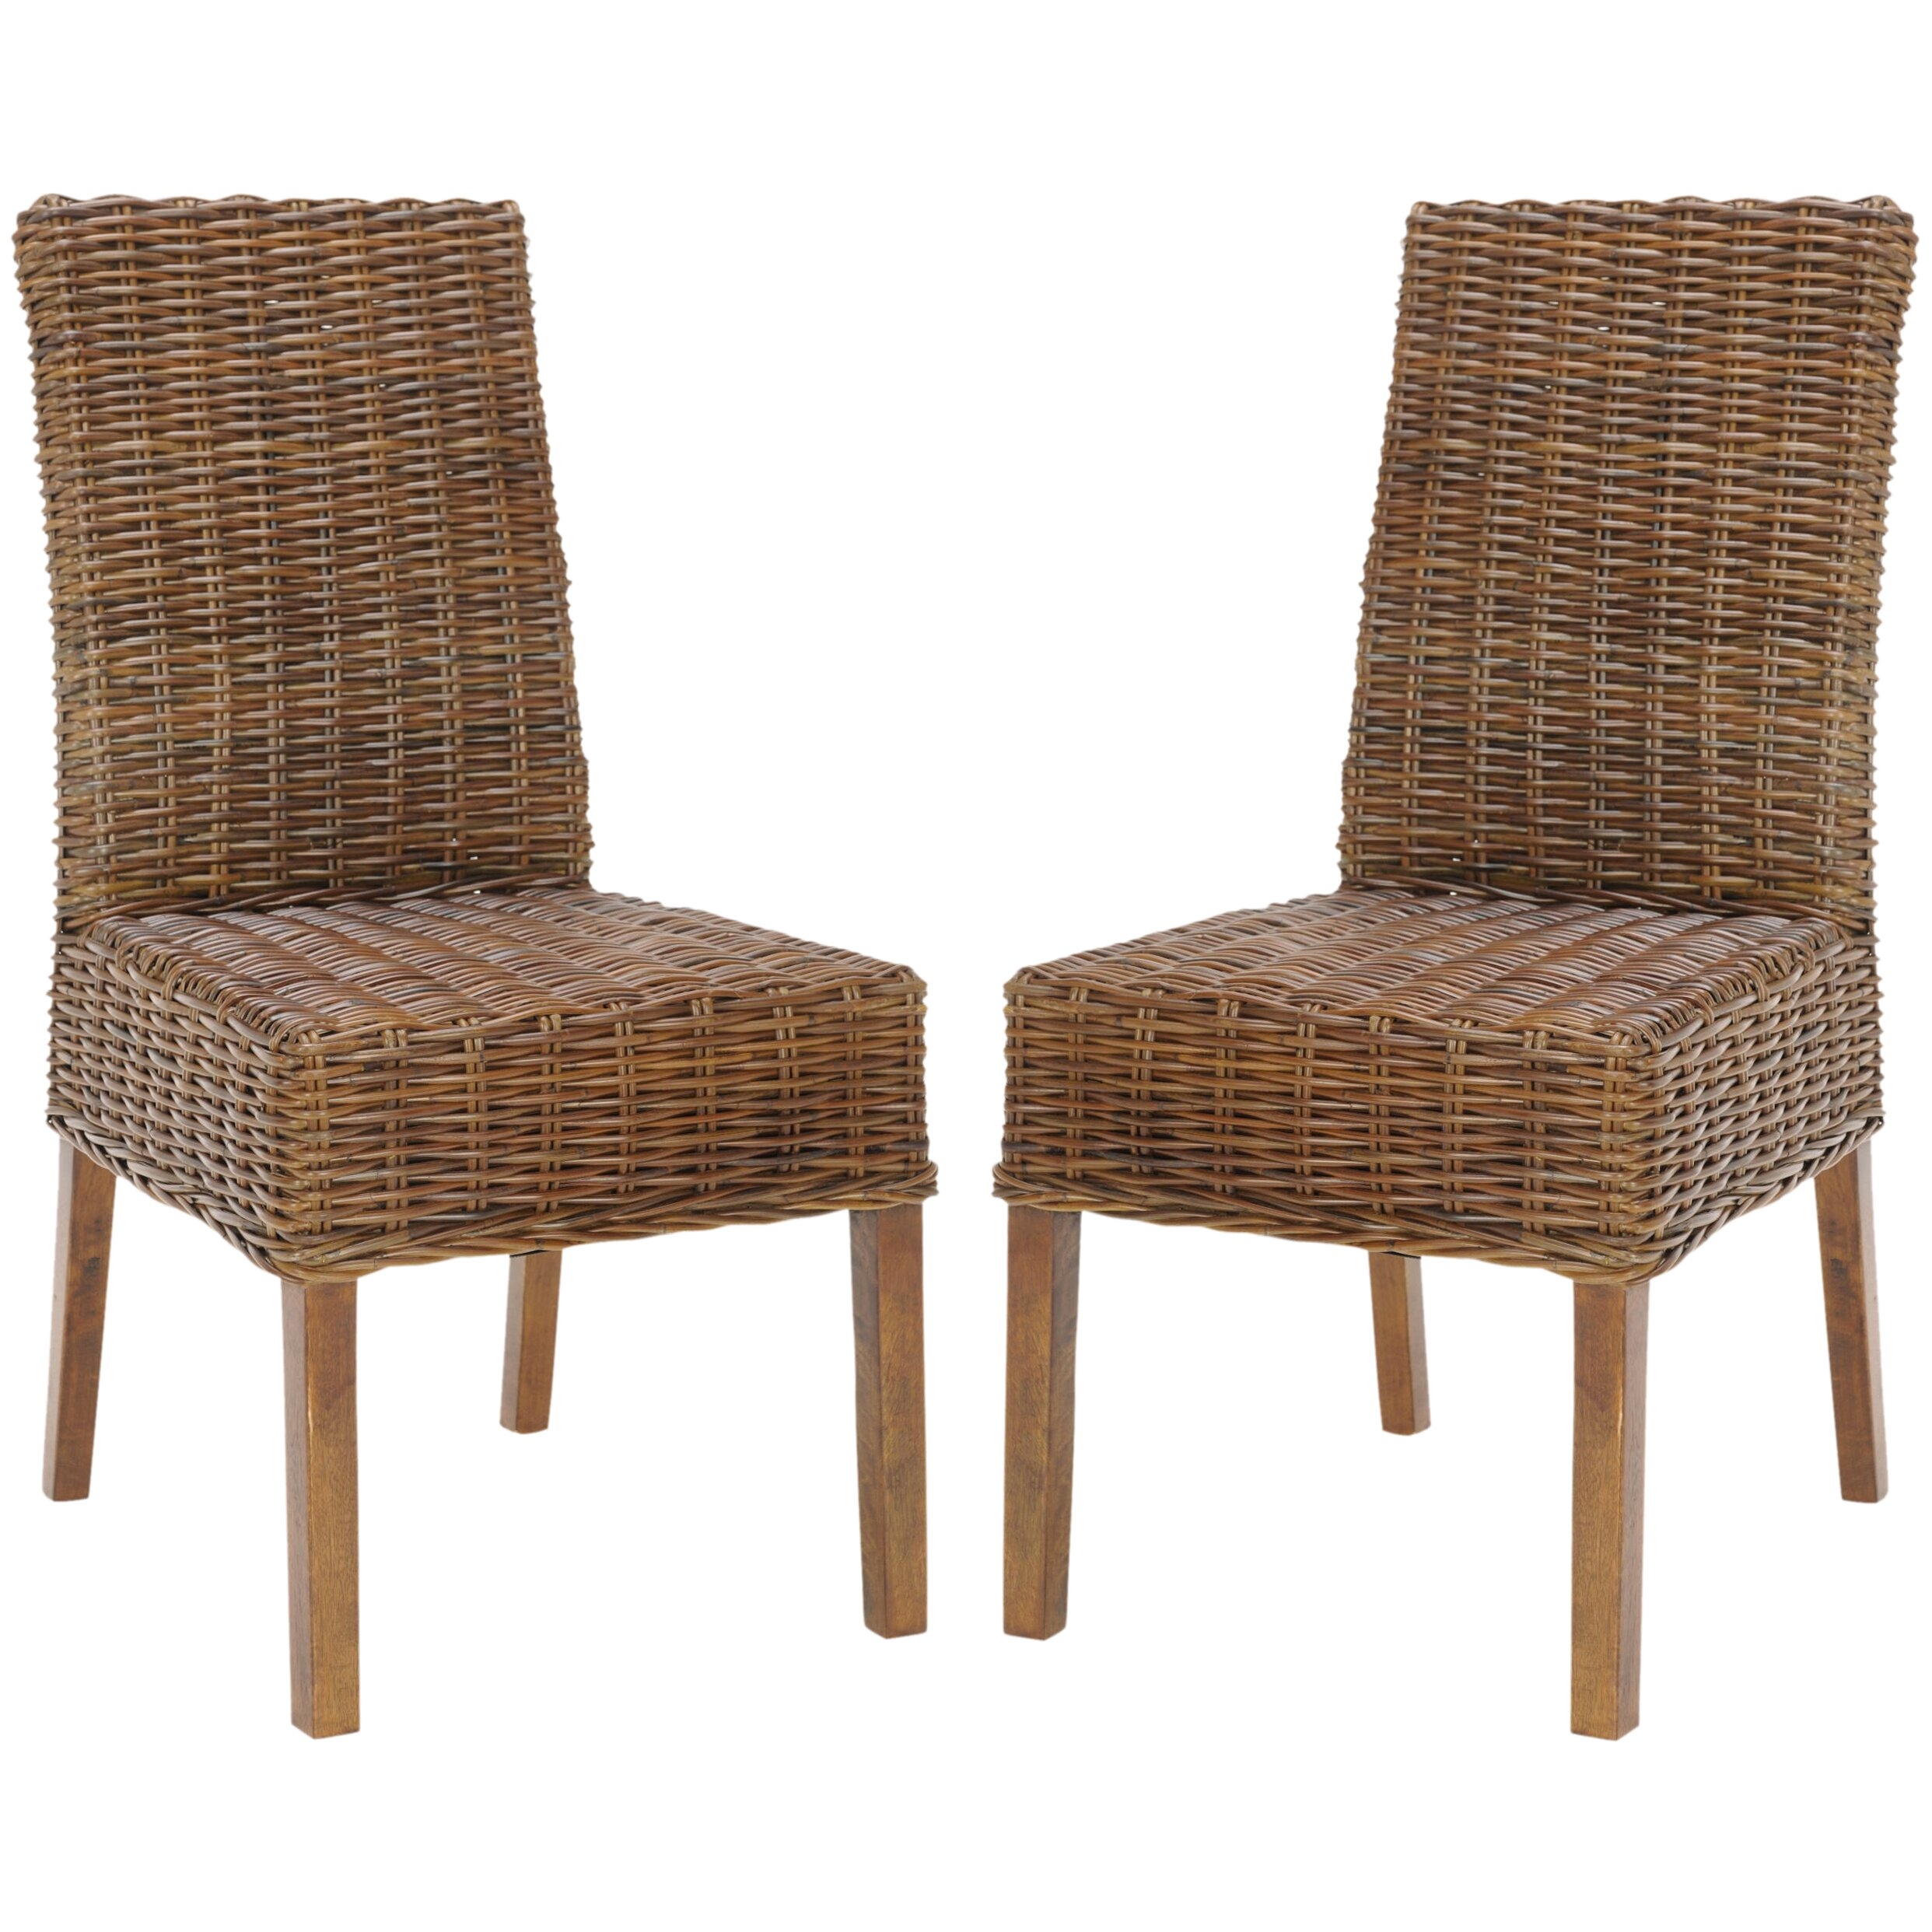 Wicker Indoor Dining Chairs Ideas on Foter